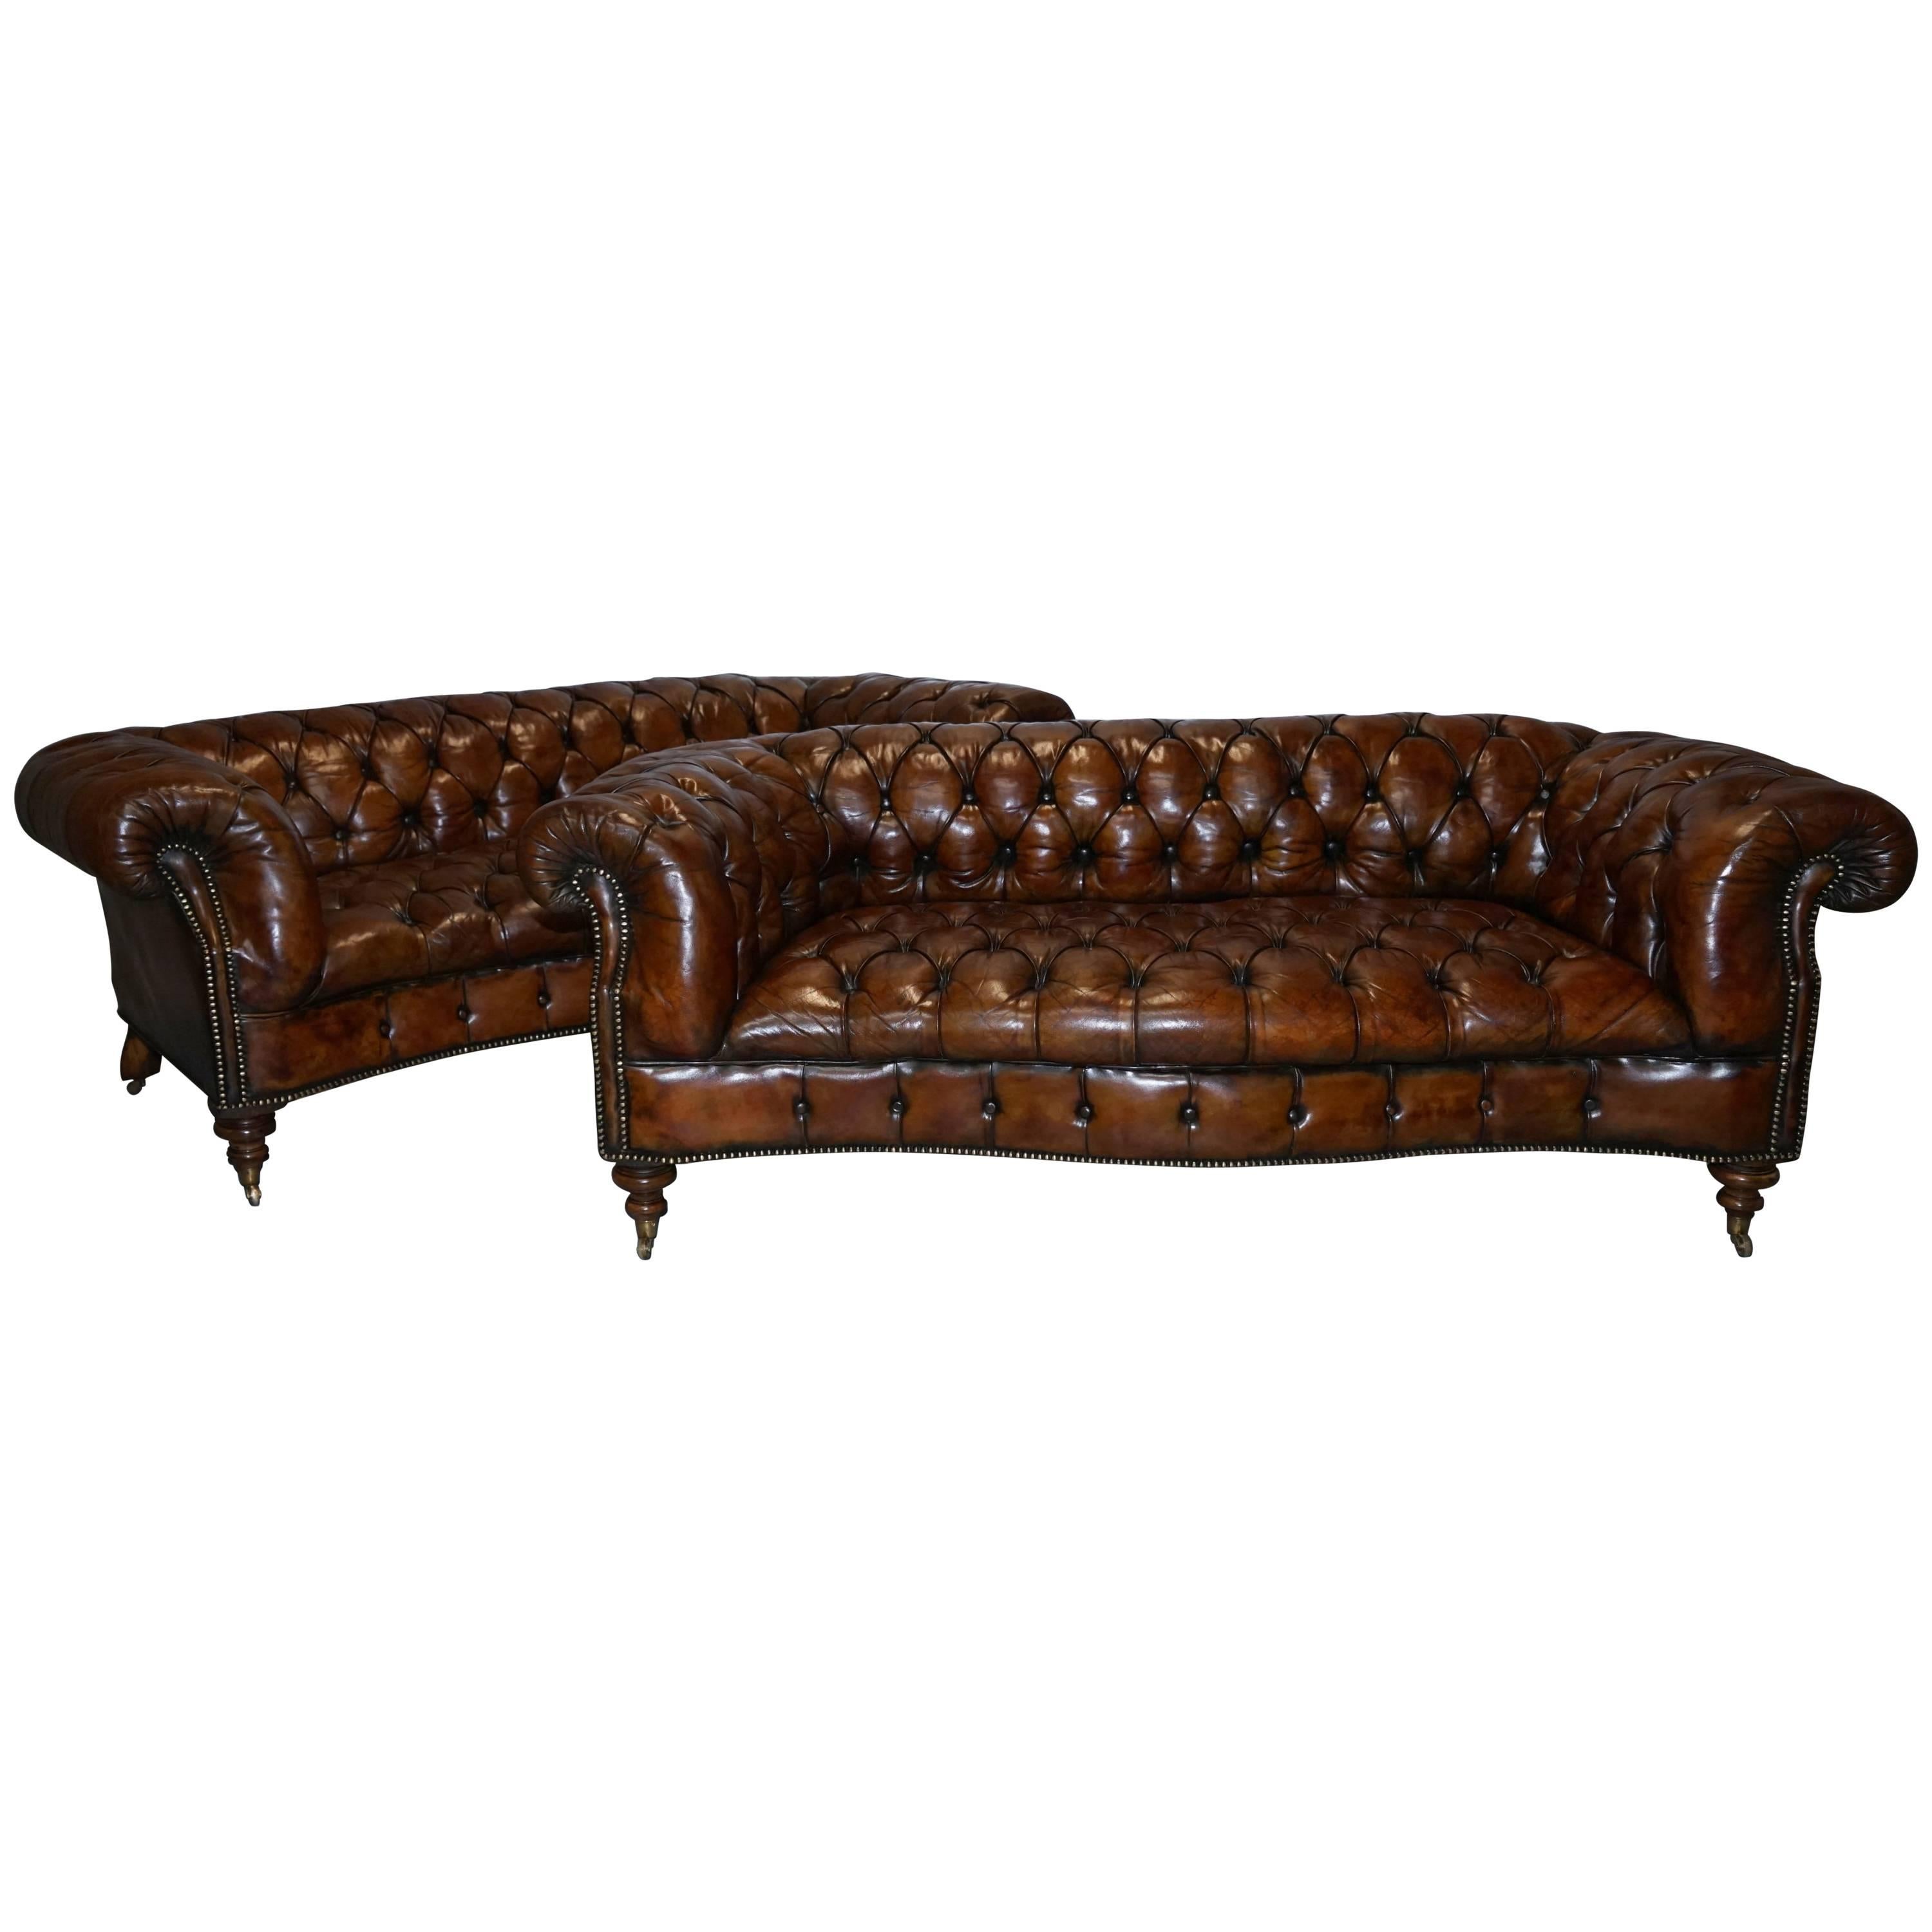 Pair of Fully Restored Howard & Son's Style Victorian Chesterfield Leather Sofas